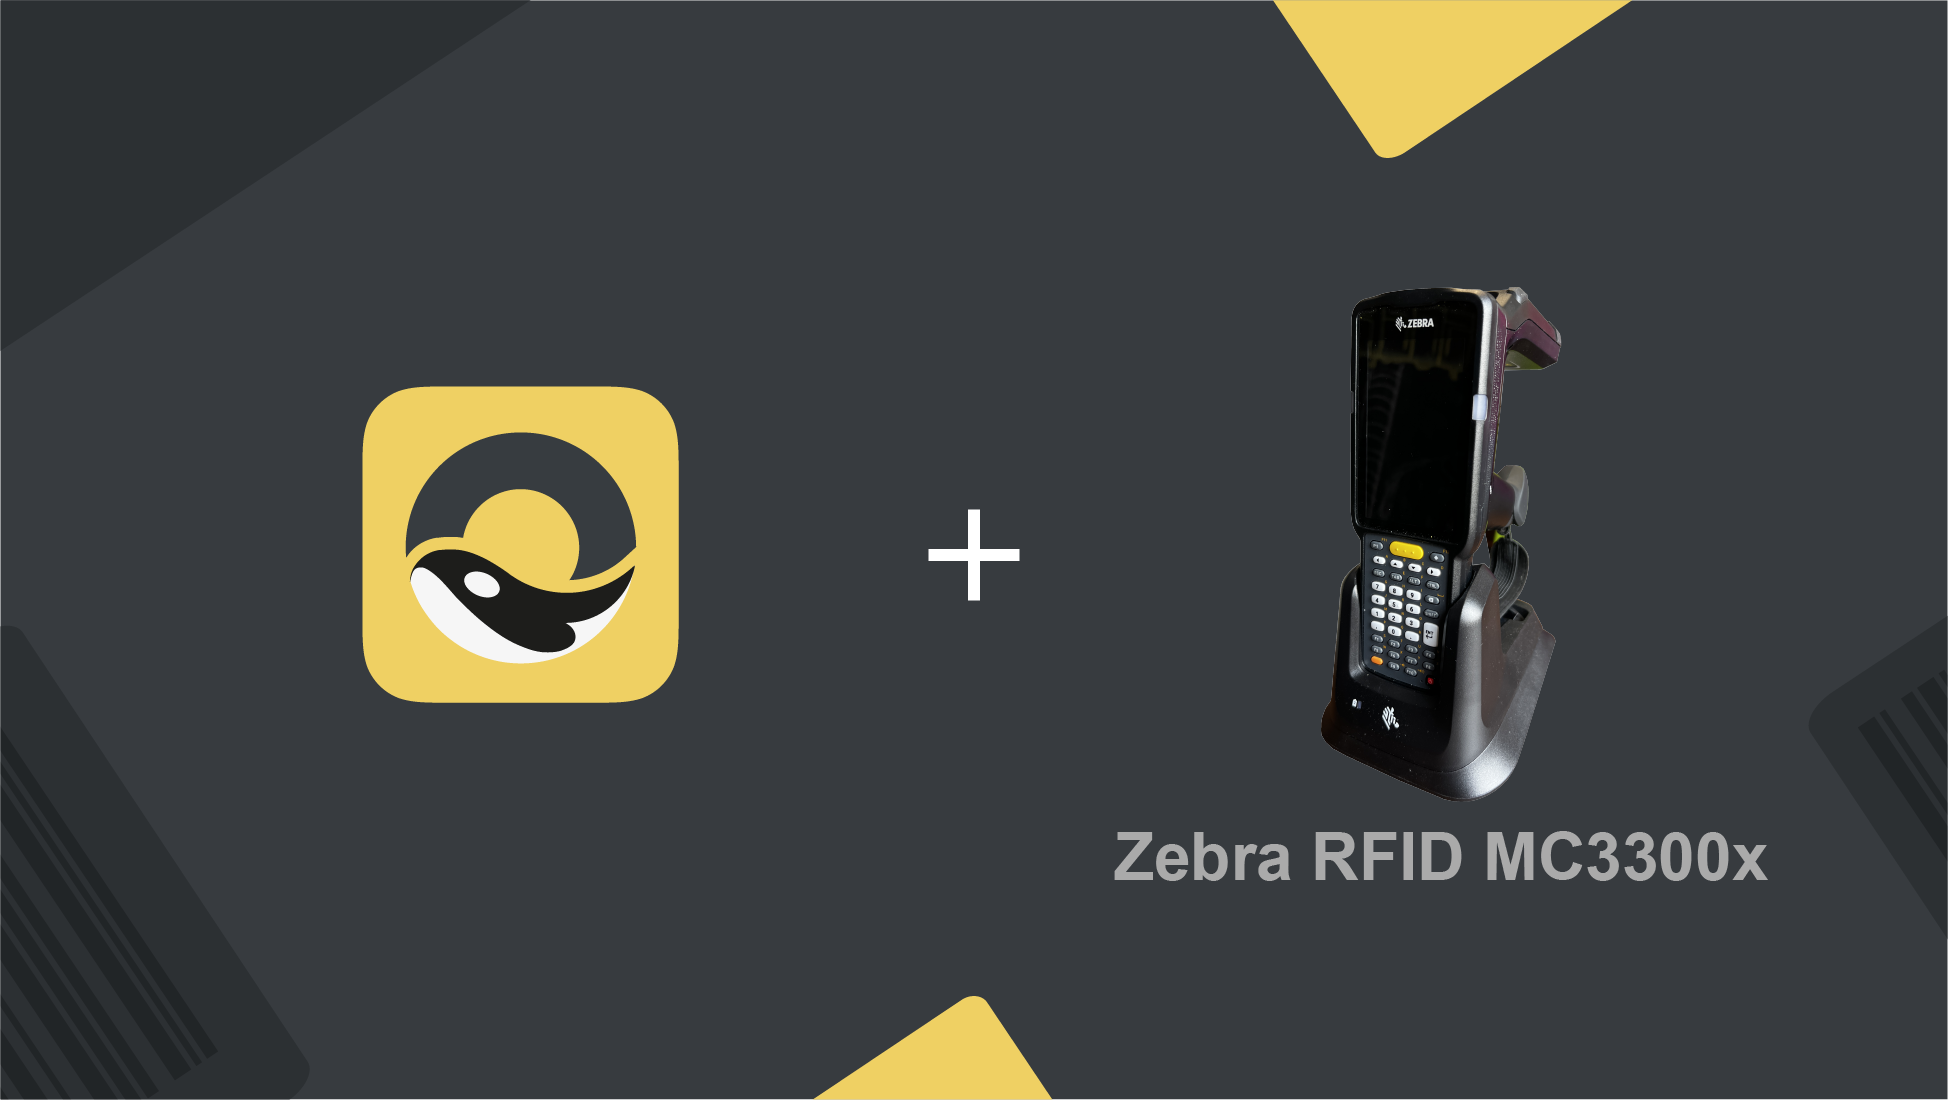 Using the Zebra MC3300x RFID scanner with Orca Scan